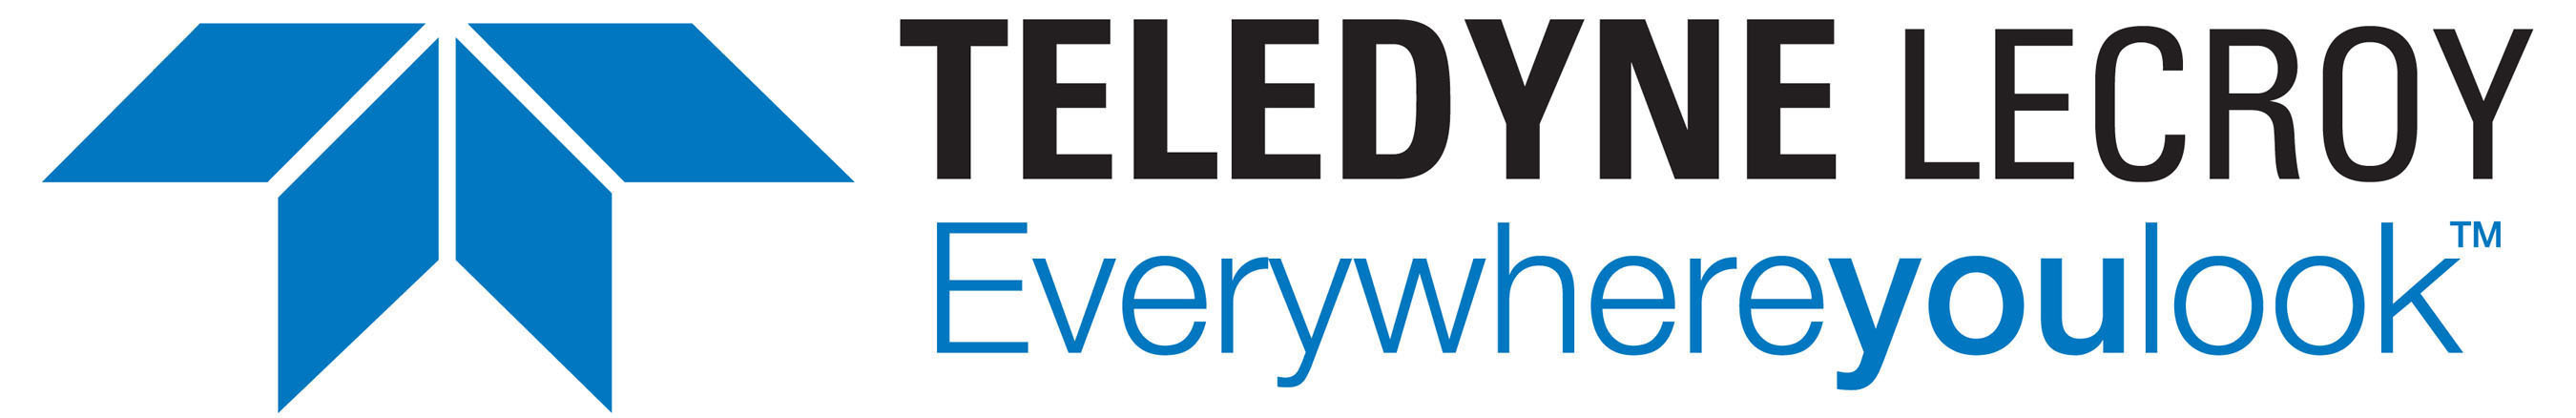 Teledyne LeCroy is a leading provider of oscilloscopes, protocol analyzers and related test and measurement solutions that enable companies across a wide range of industries to design and test electronic devices of all types. (PRNewsFoto/Teledyne LeCroy)